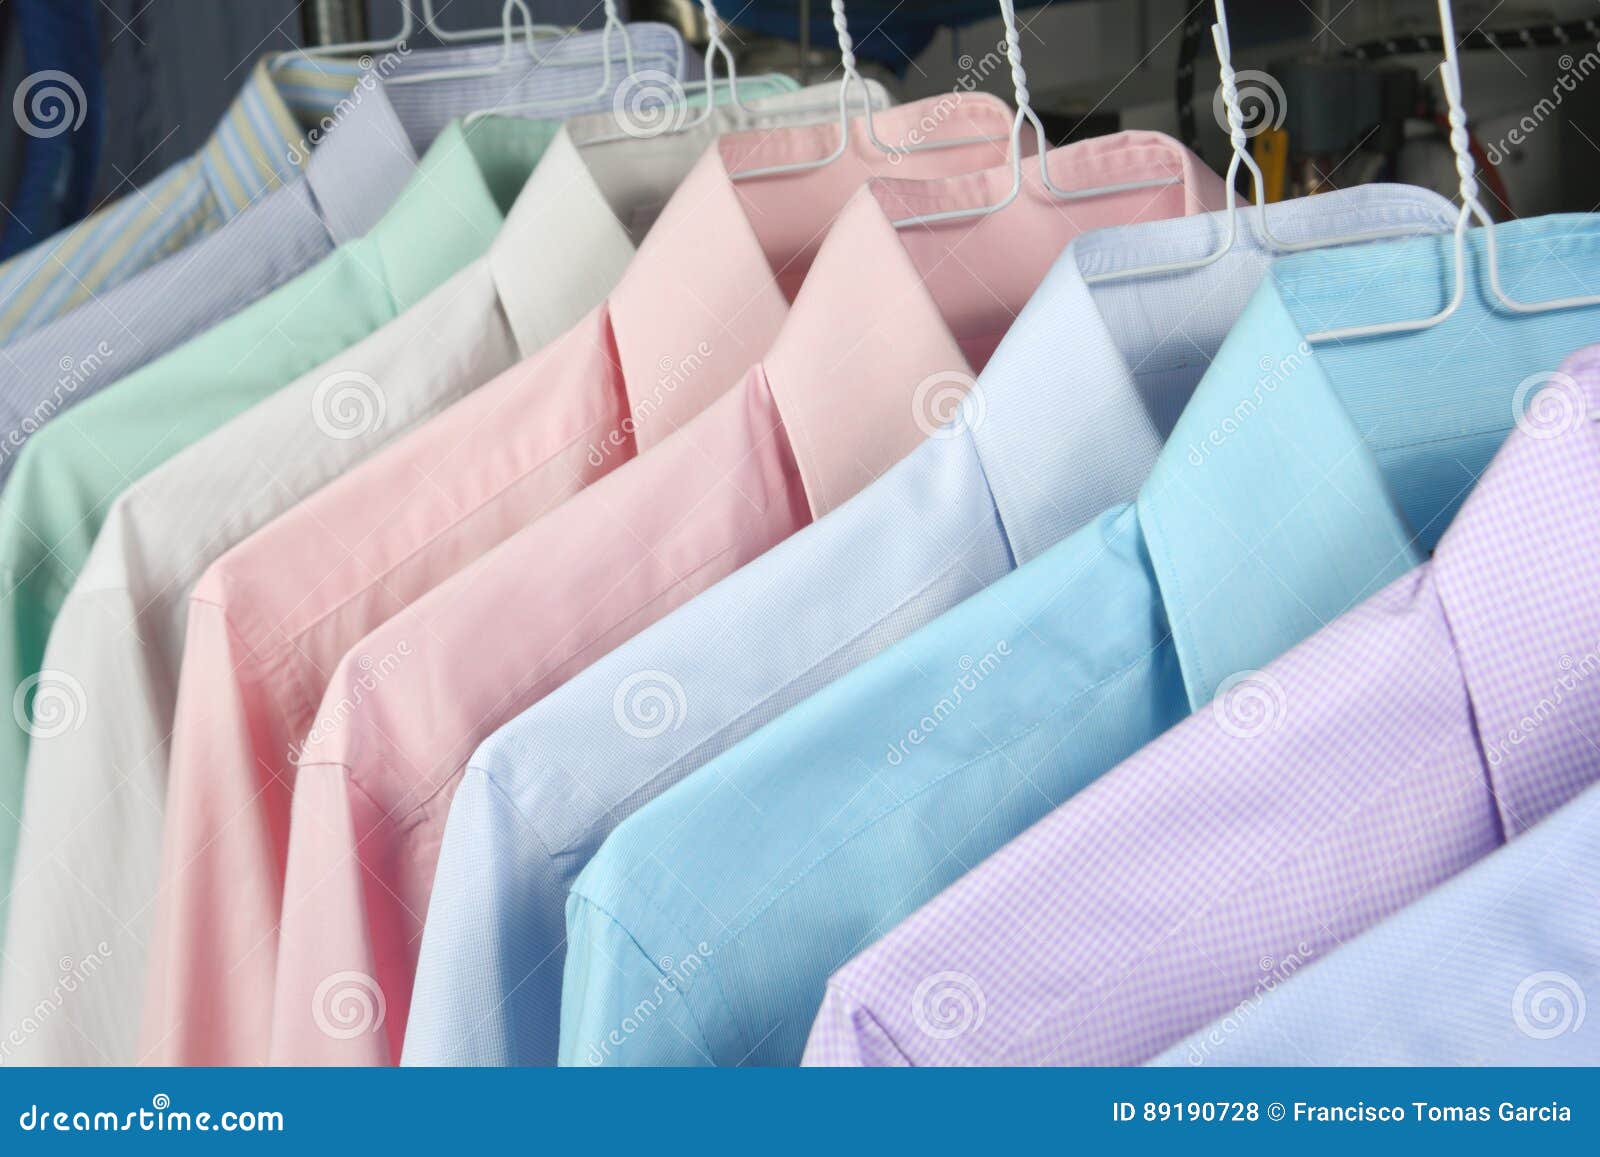 shirts at the dry cleaners freshly ironed